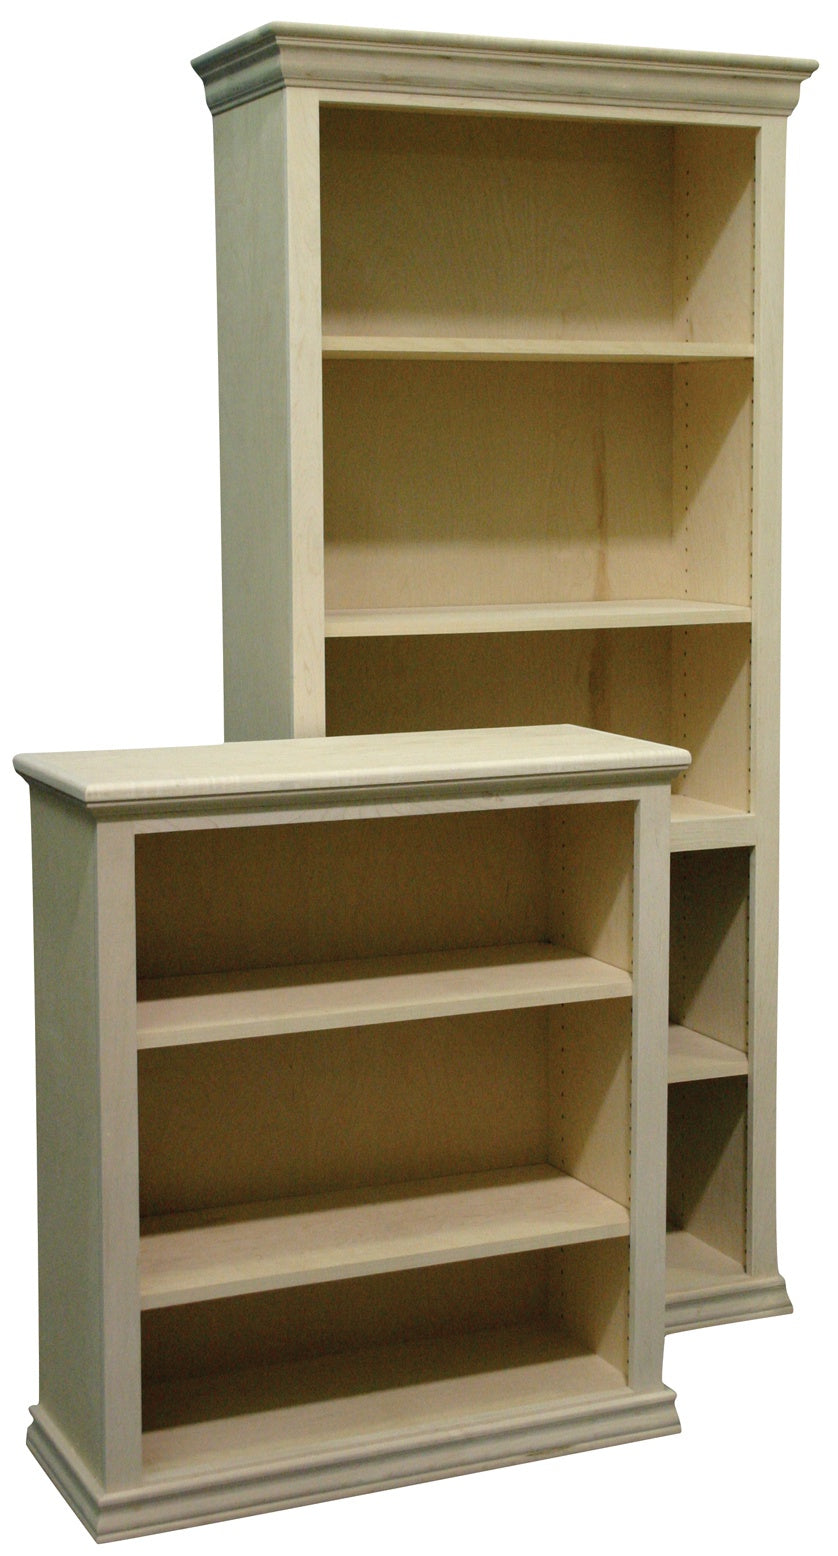 NTW New Traditional Wrap Bookcases